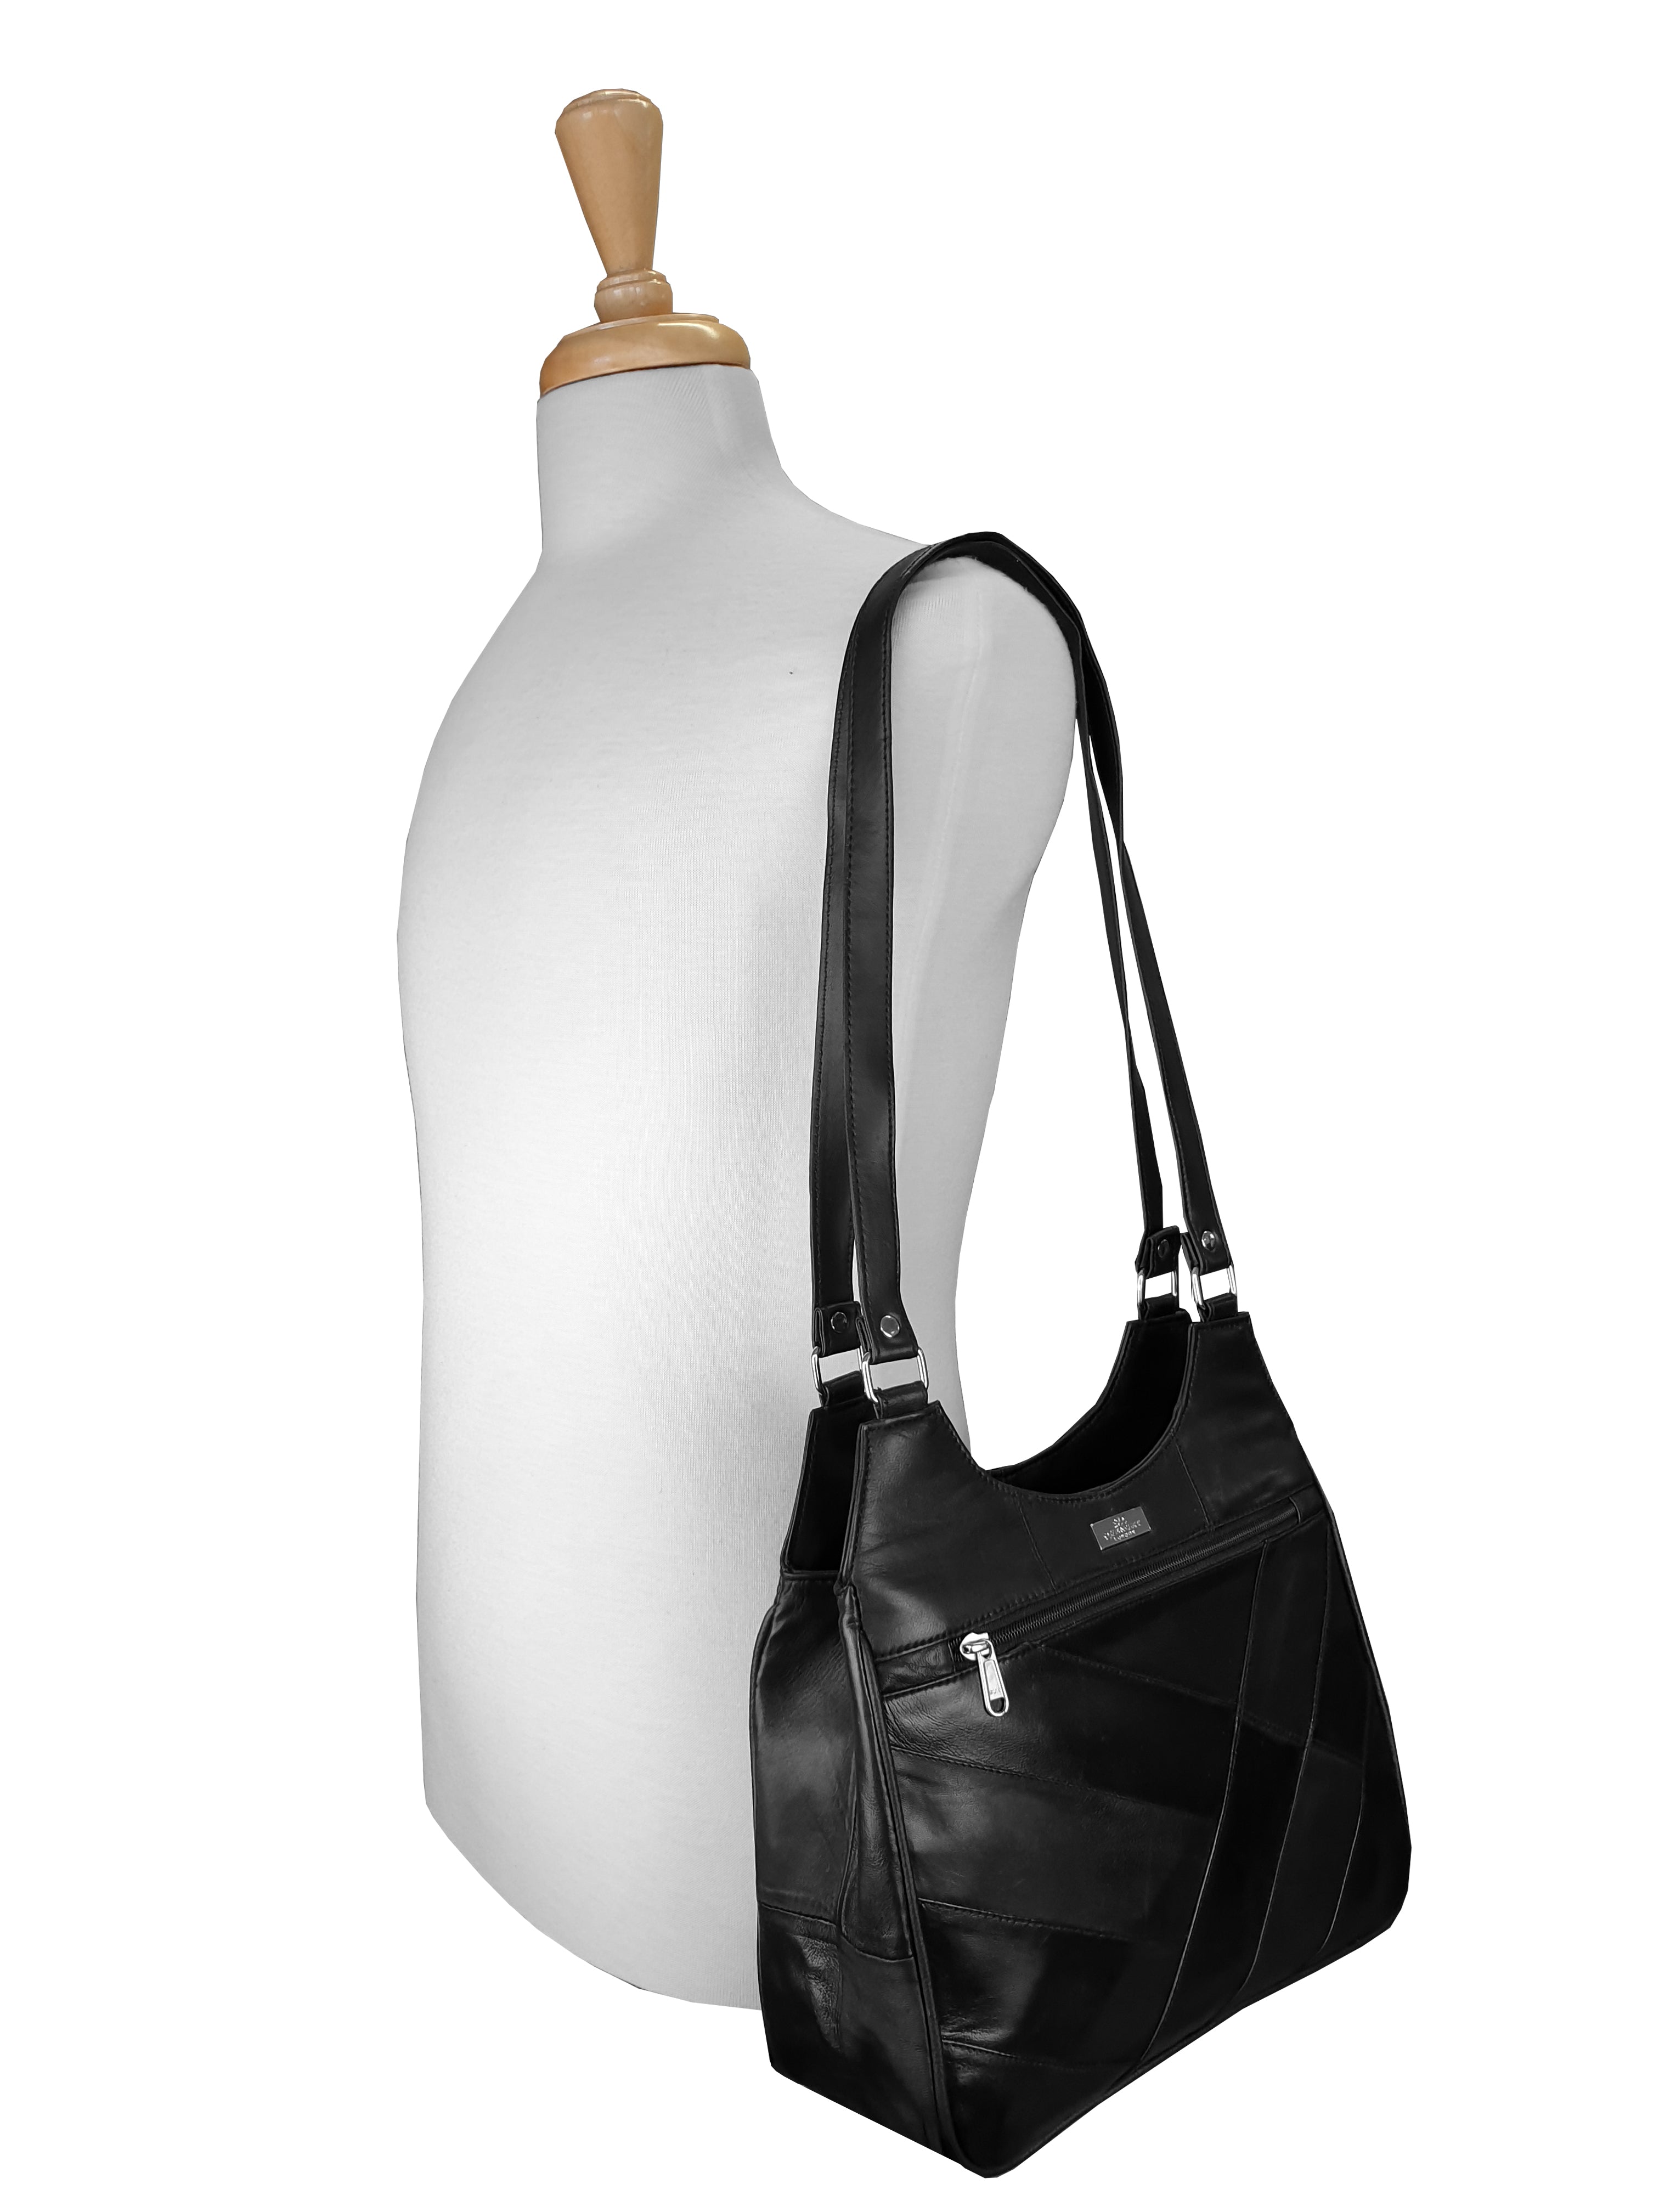 What color purse should we take with a black dress? - Quora